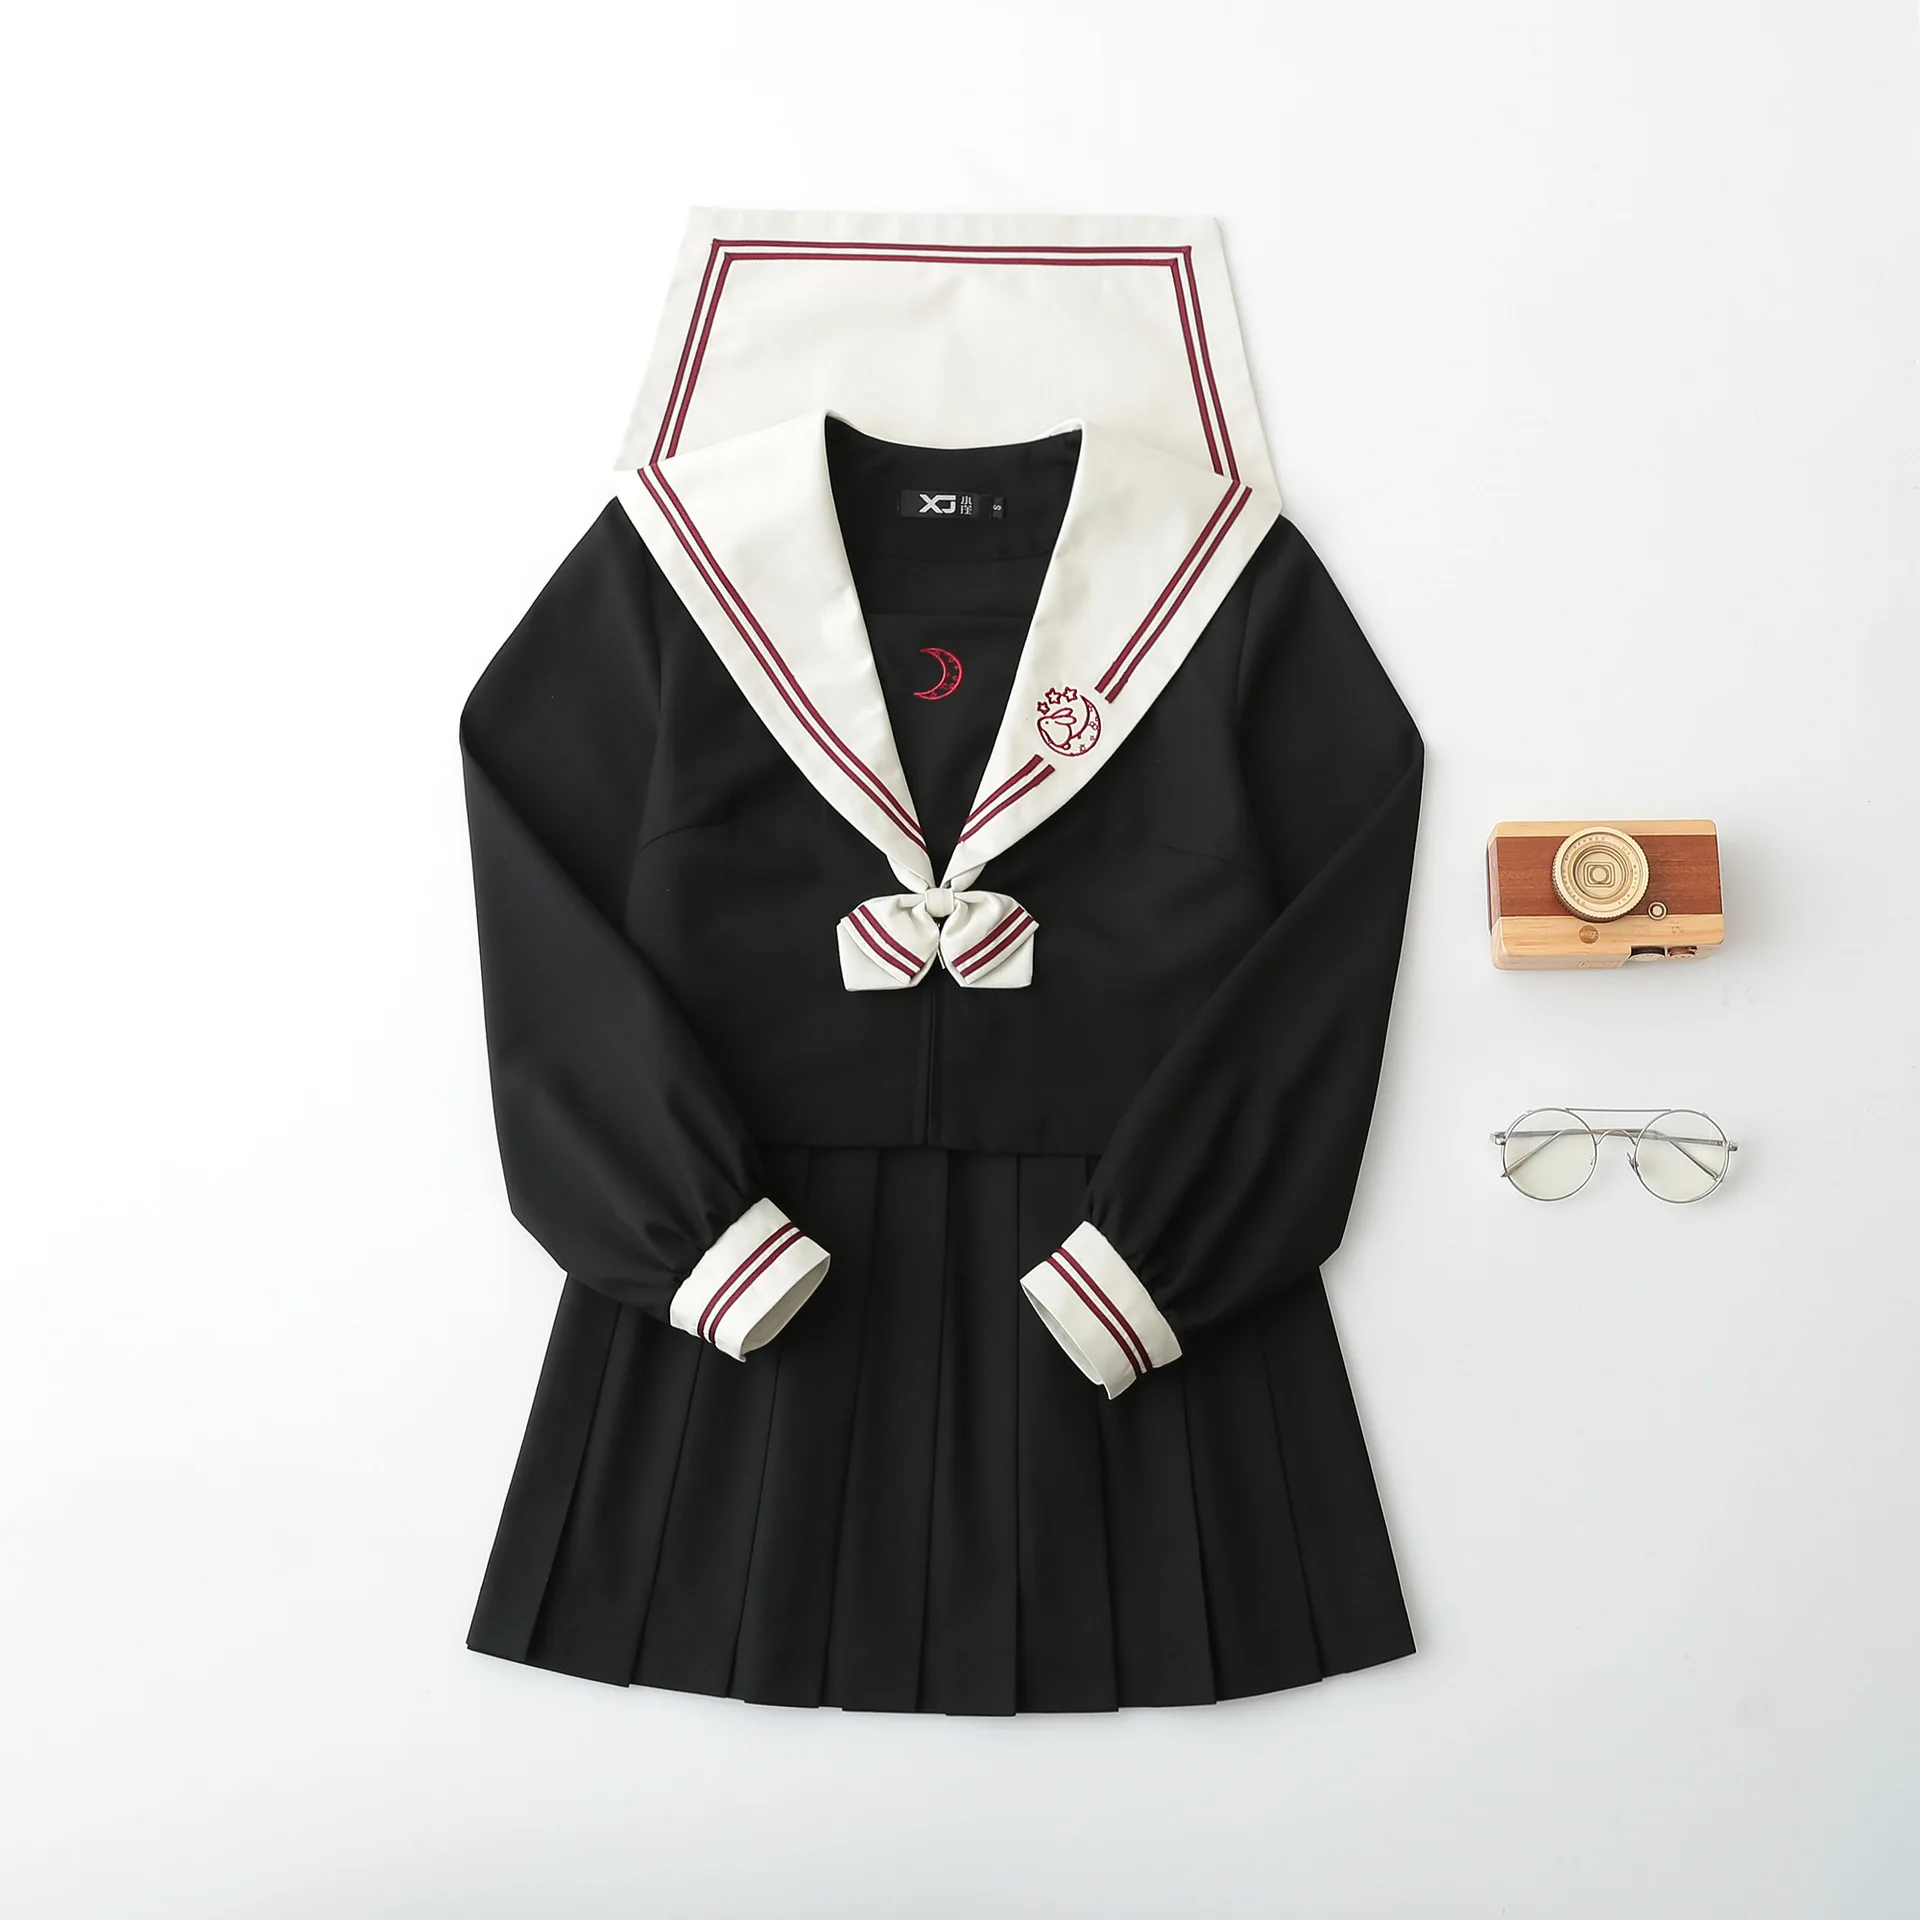 Details about   Japanese High School Uniform Suit JK Cosplay Costume Outfit Sets Long Sleeve 